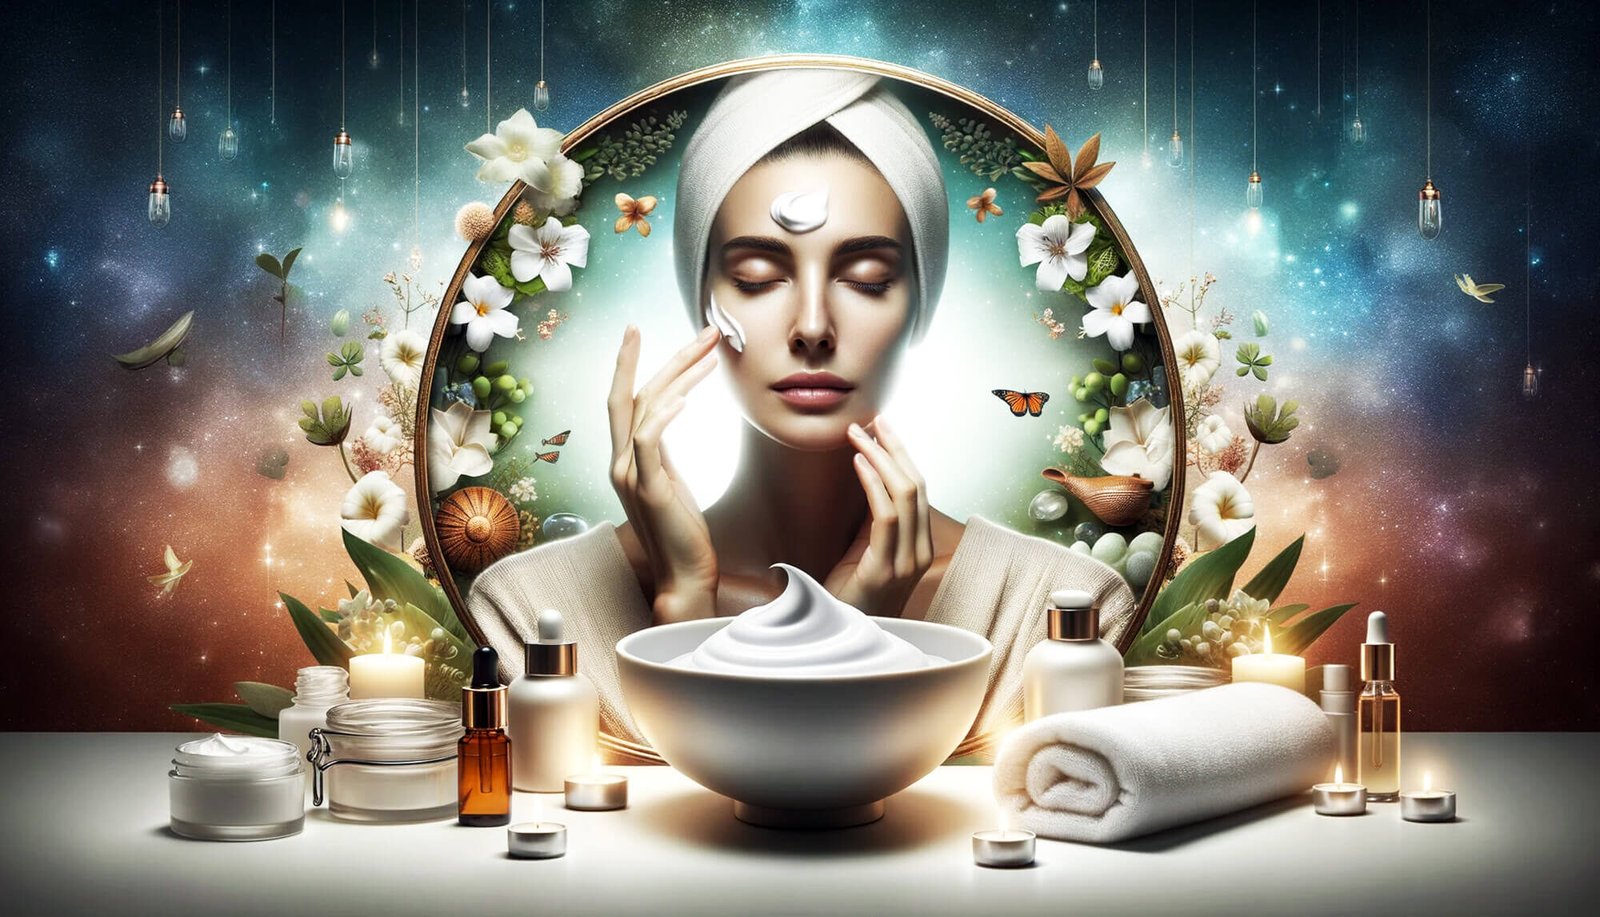 Anti-Aging Skin Care: Moisturizing and Protecting Areas Most Vulnerable to Wrinkles and Signs of Aging